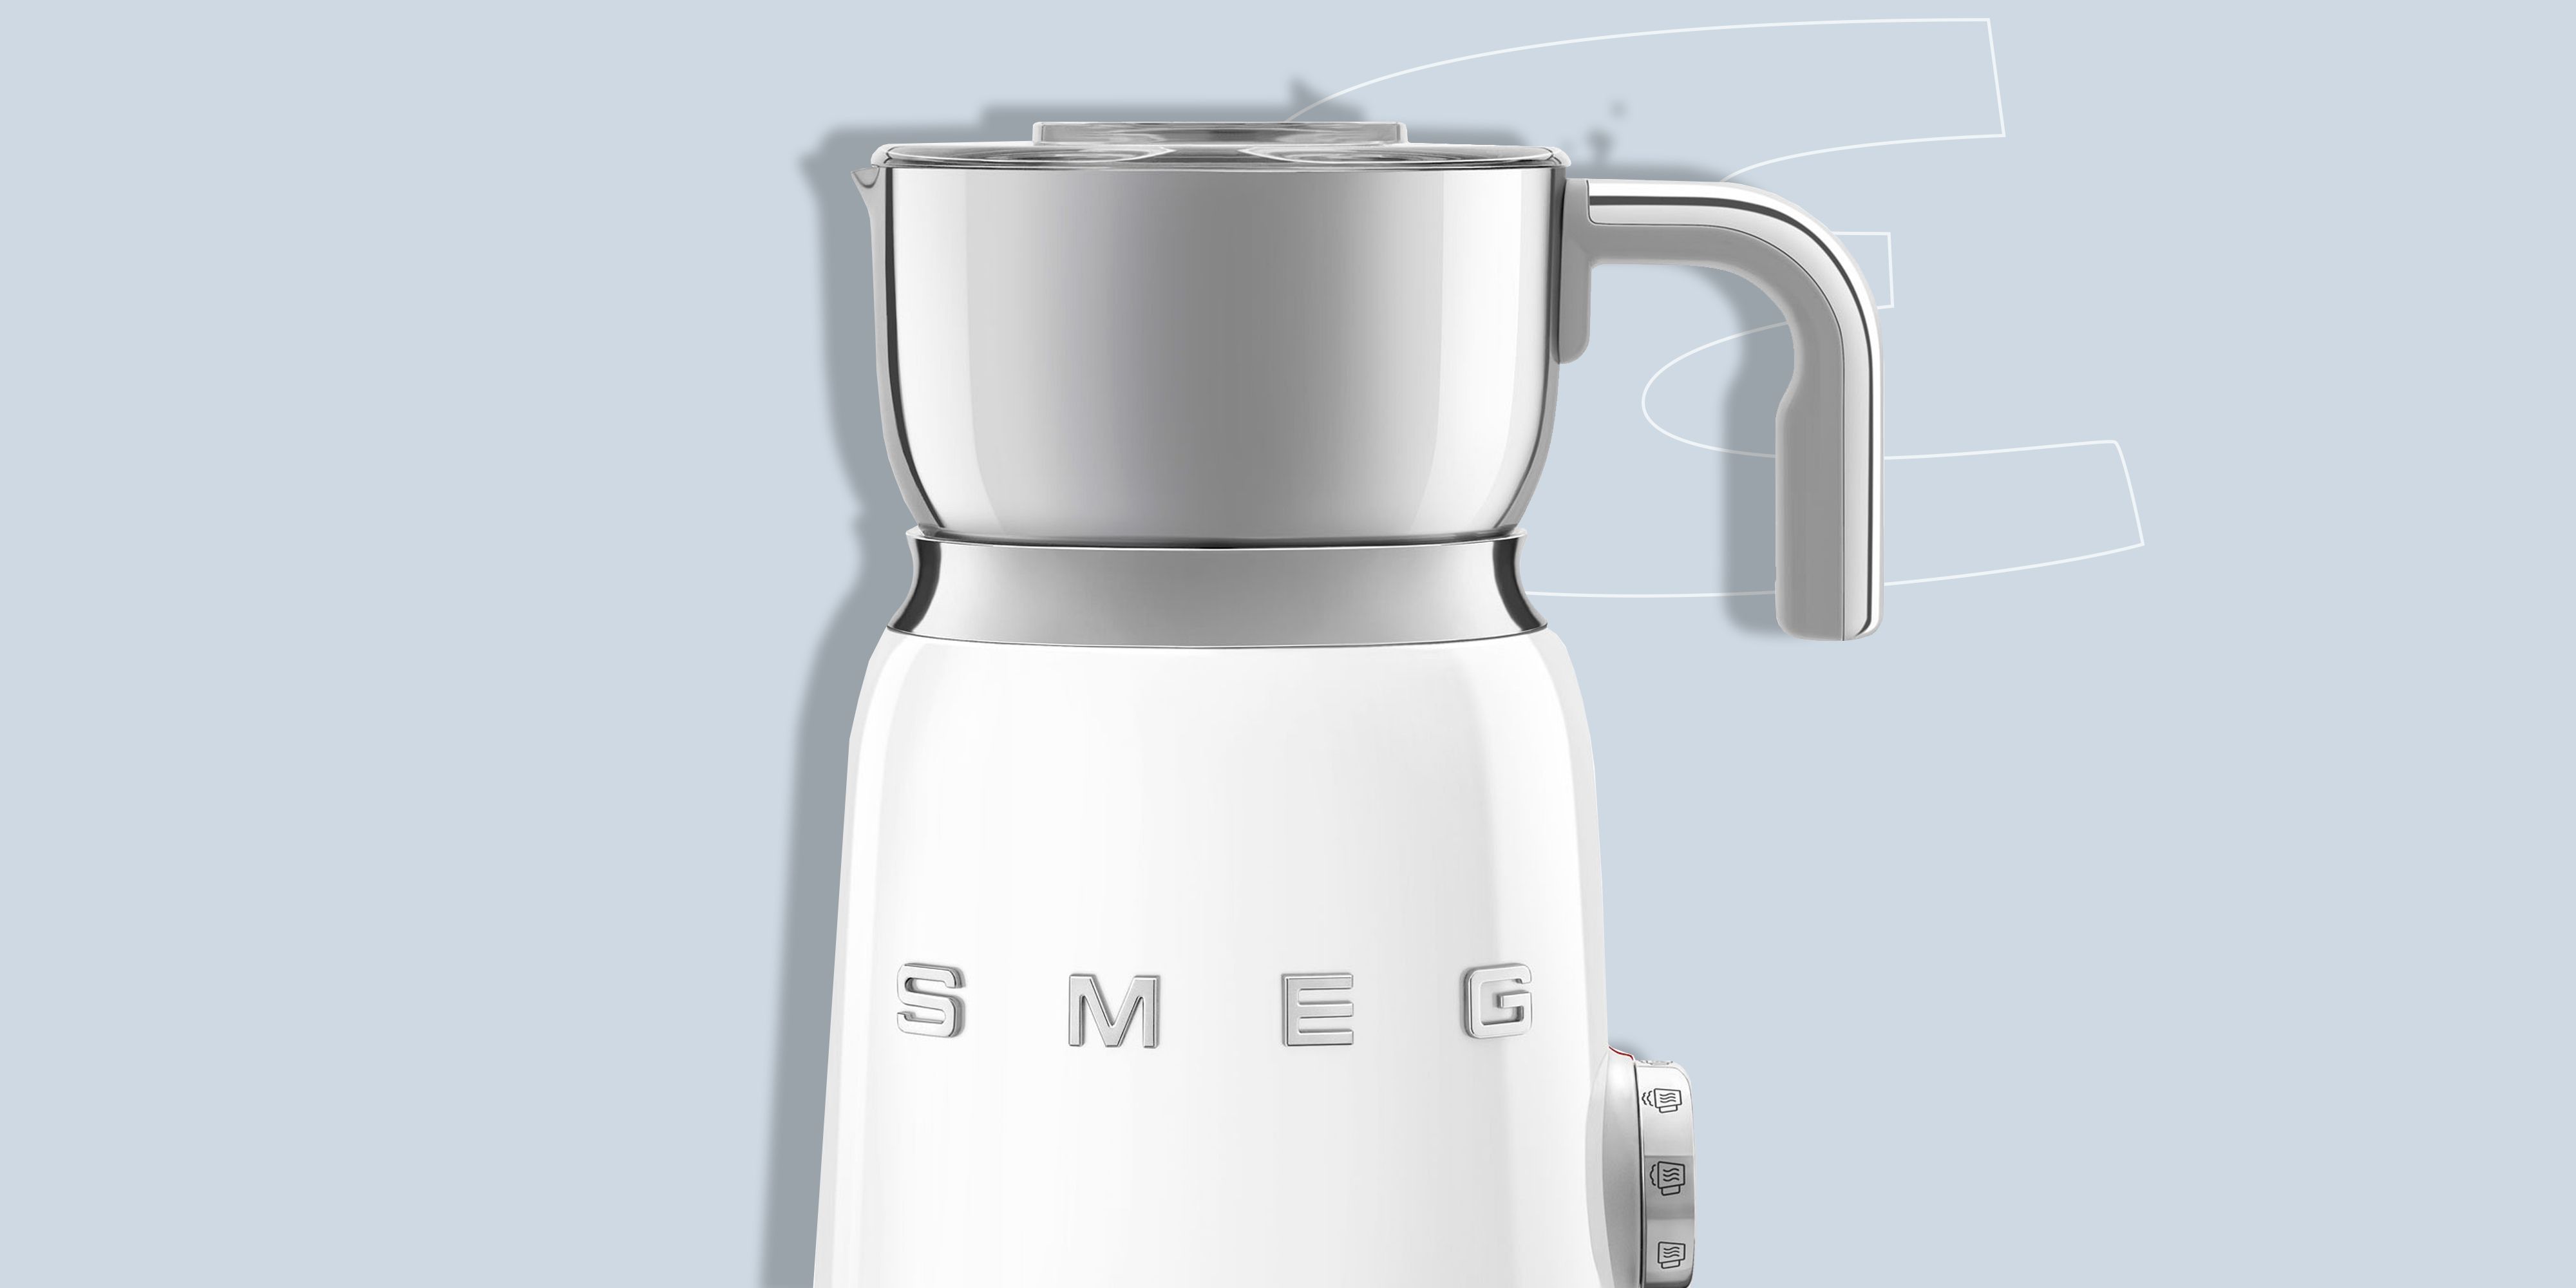 SMEG VS BREVILLE MILK FROTHER - Which One is Best? 